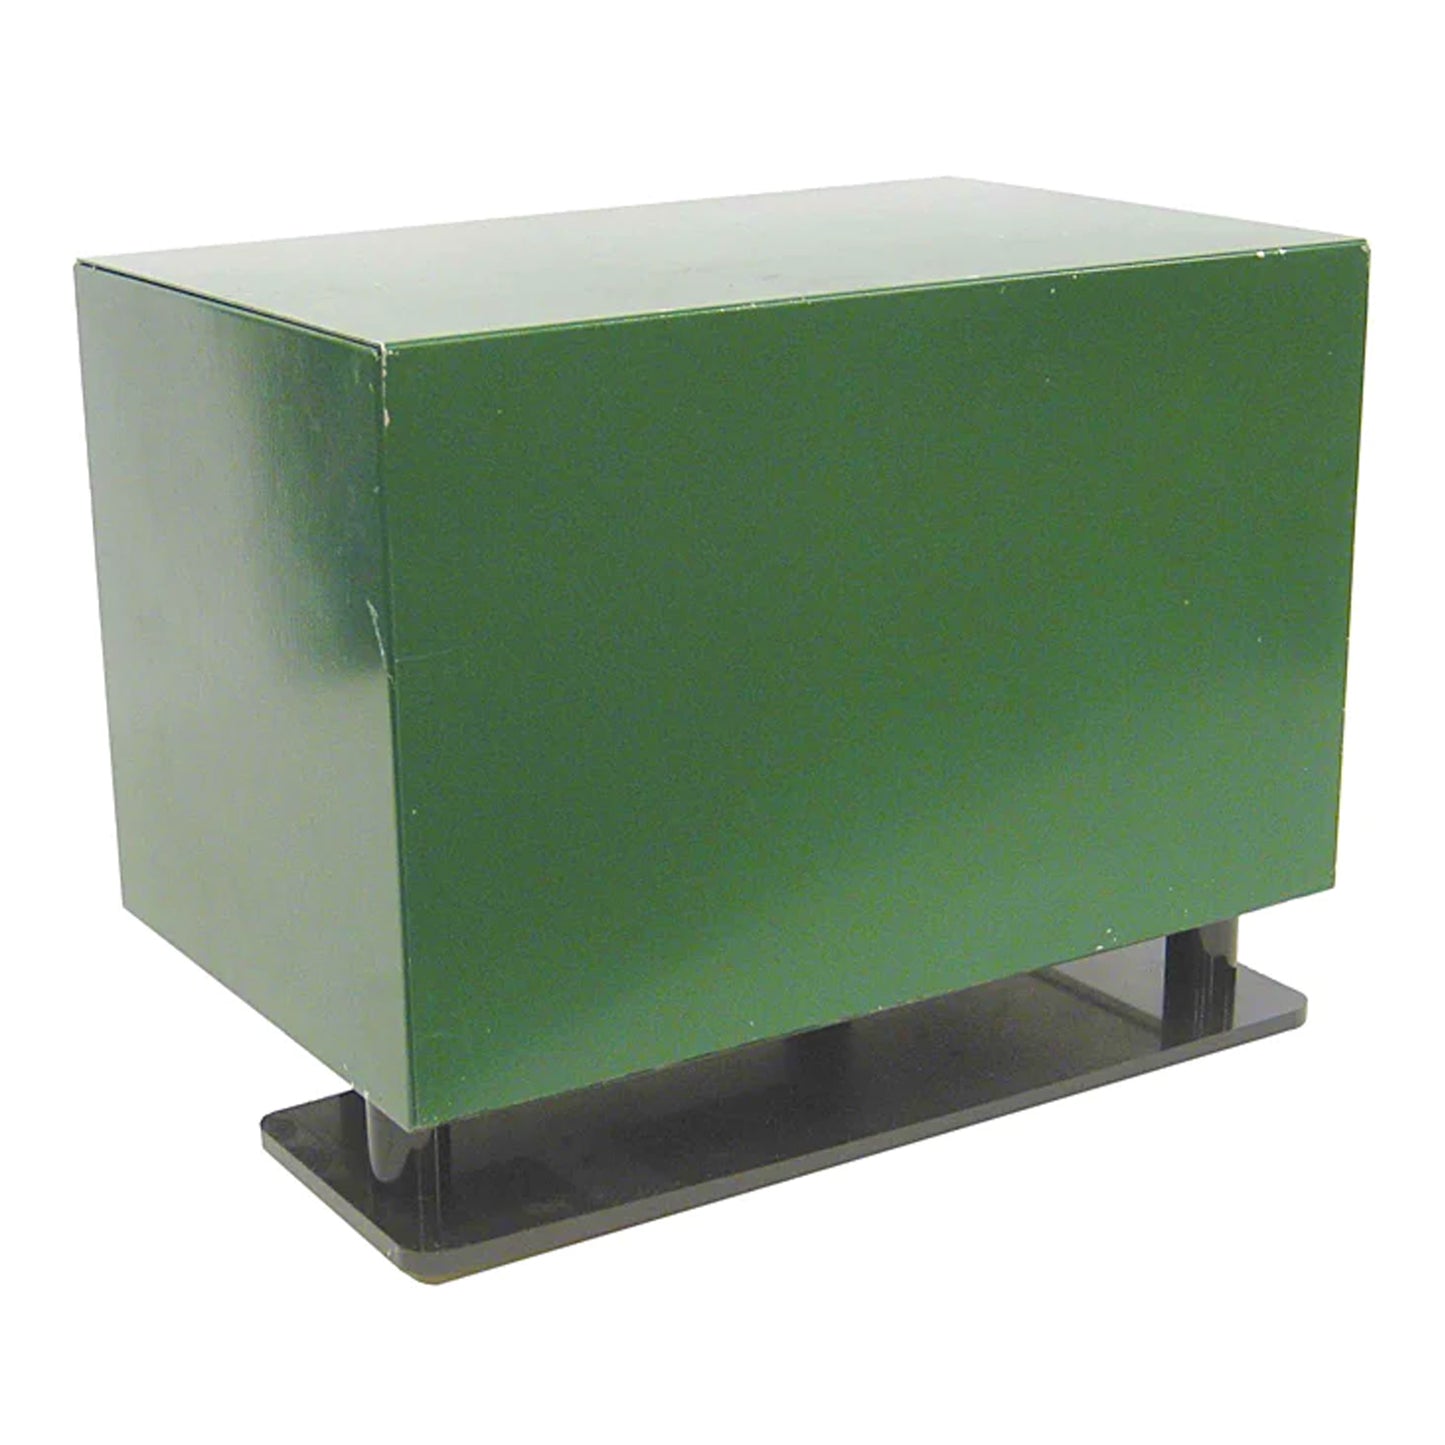 Post Mounted Lockable Cabinet with Ground Base